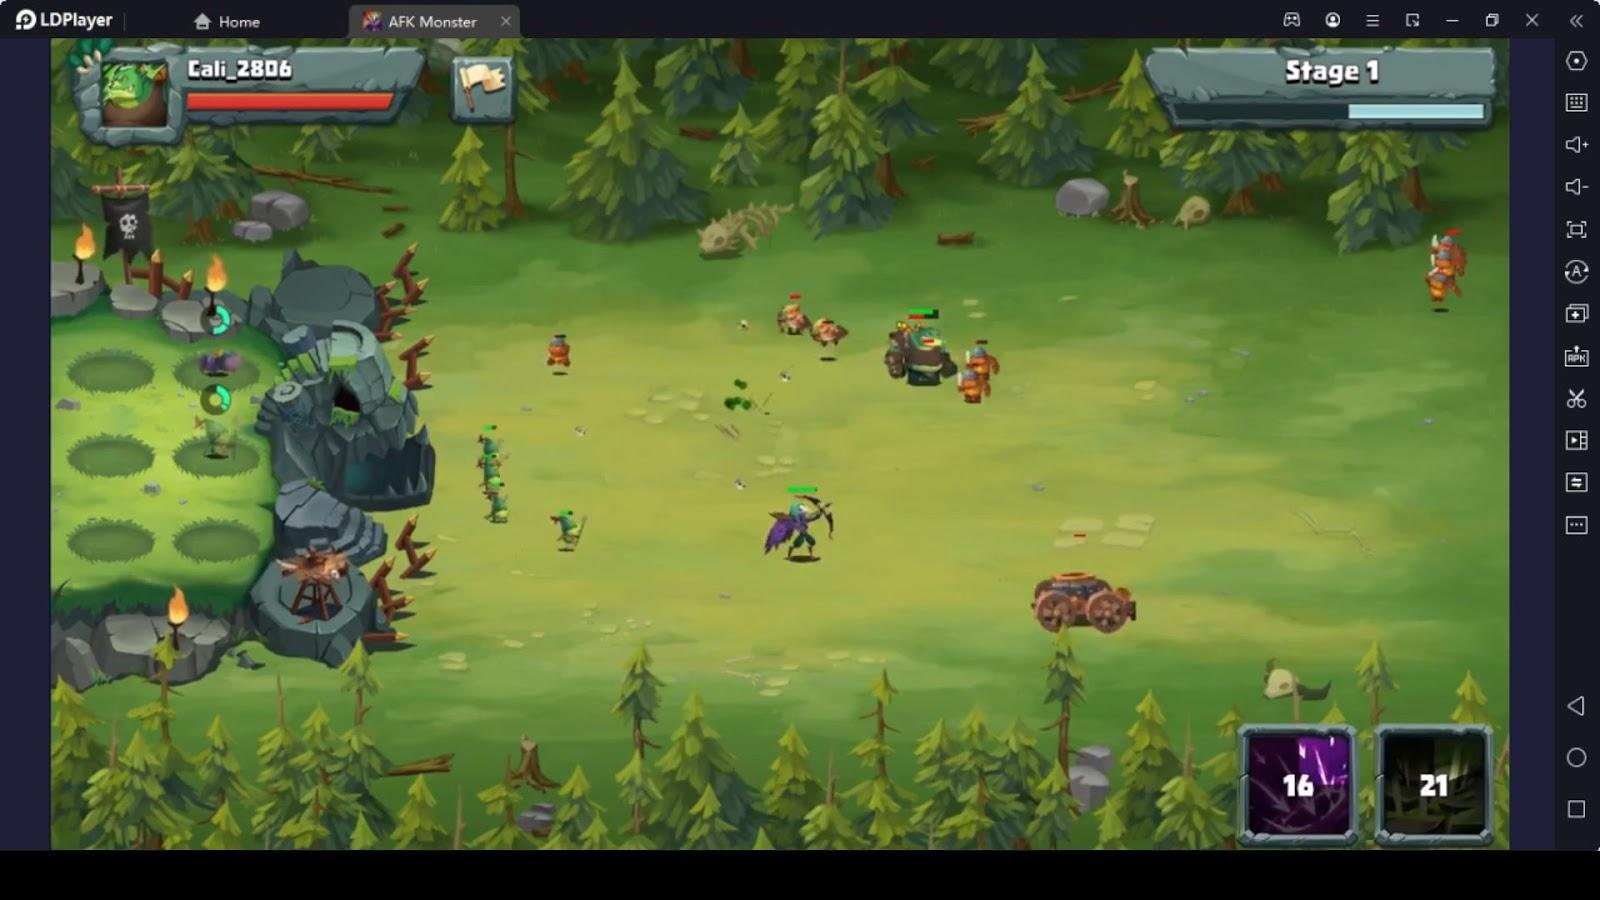 The Gameplay of AFK Monster: Summon Legend TD